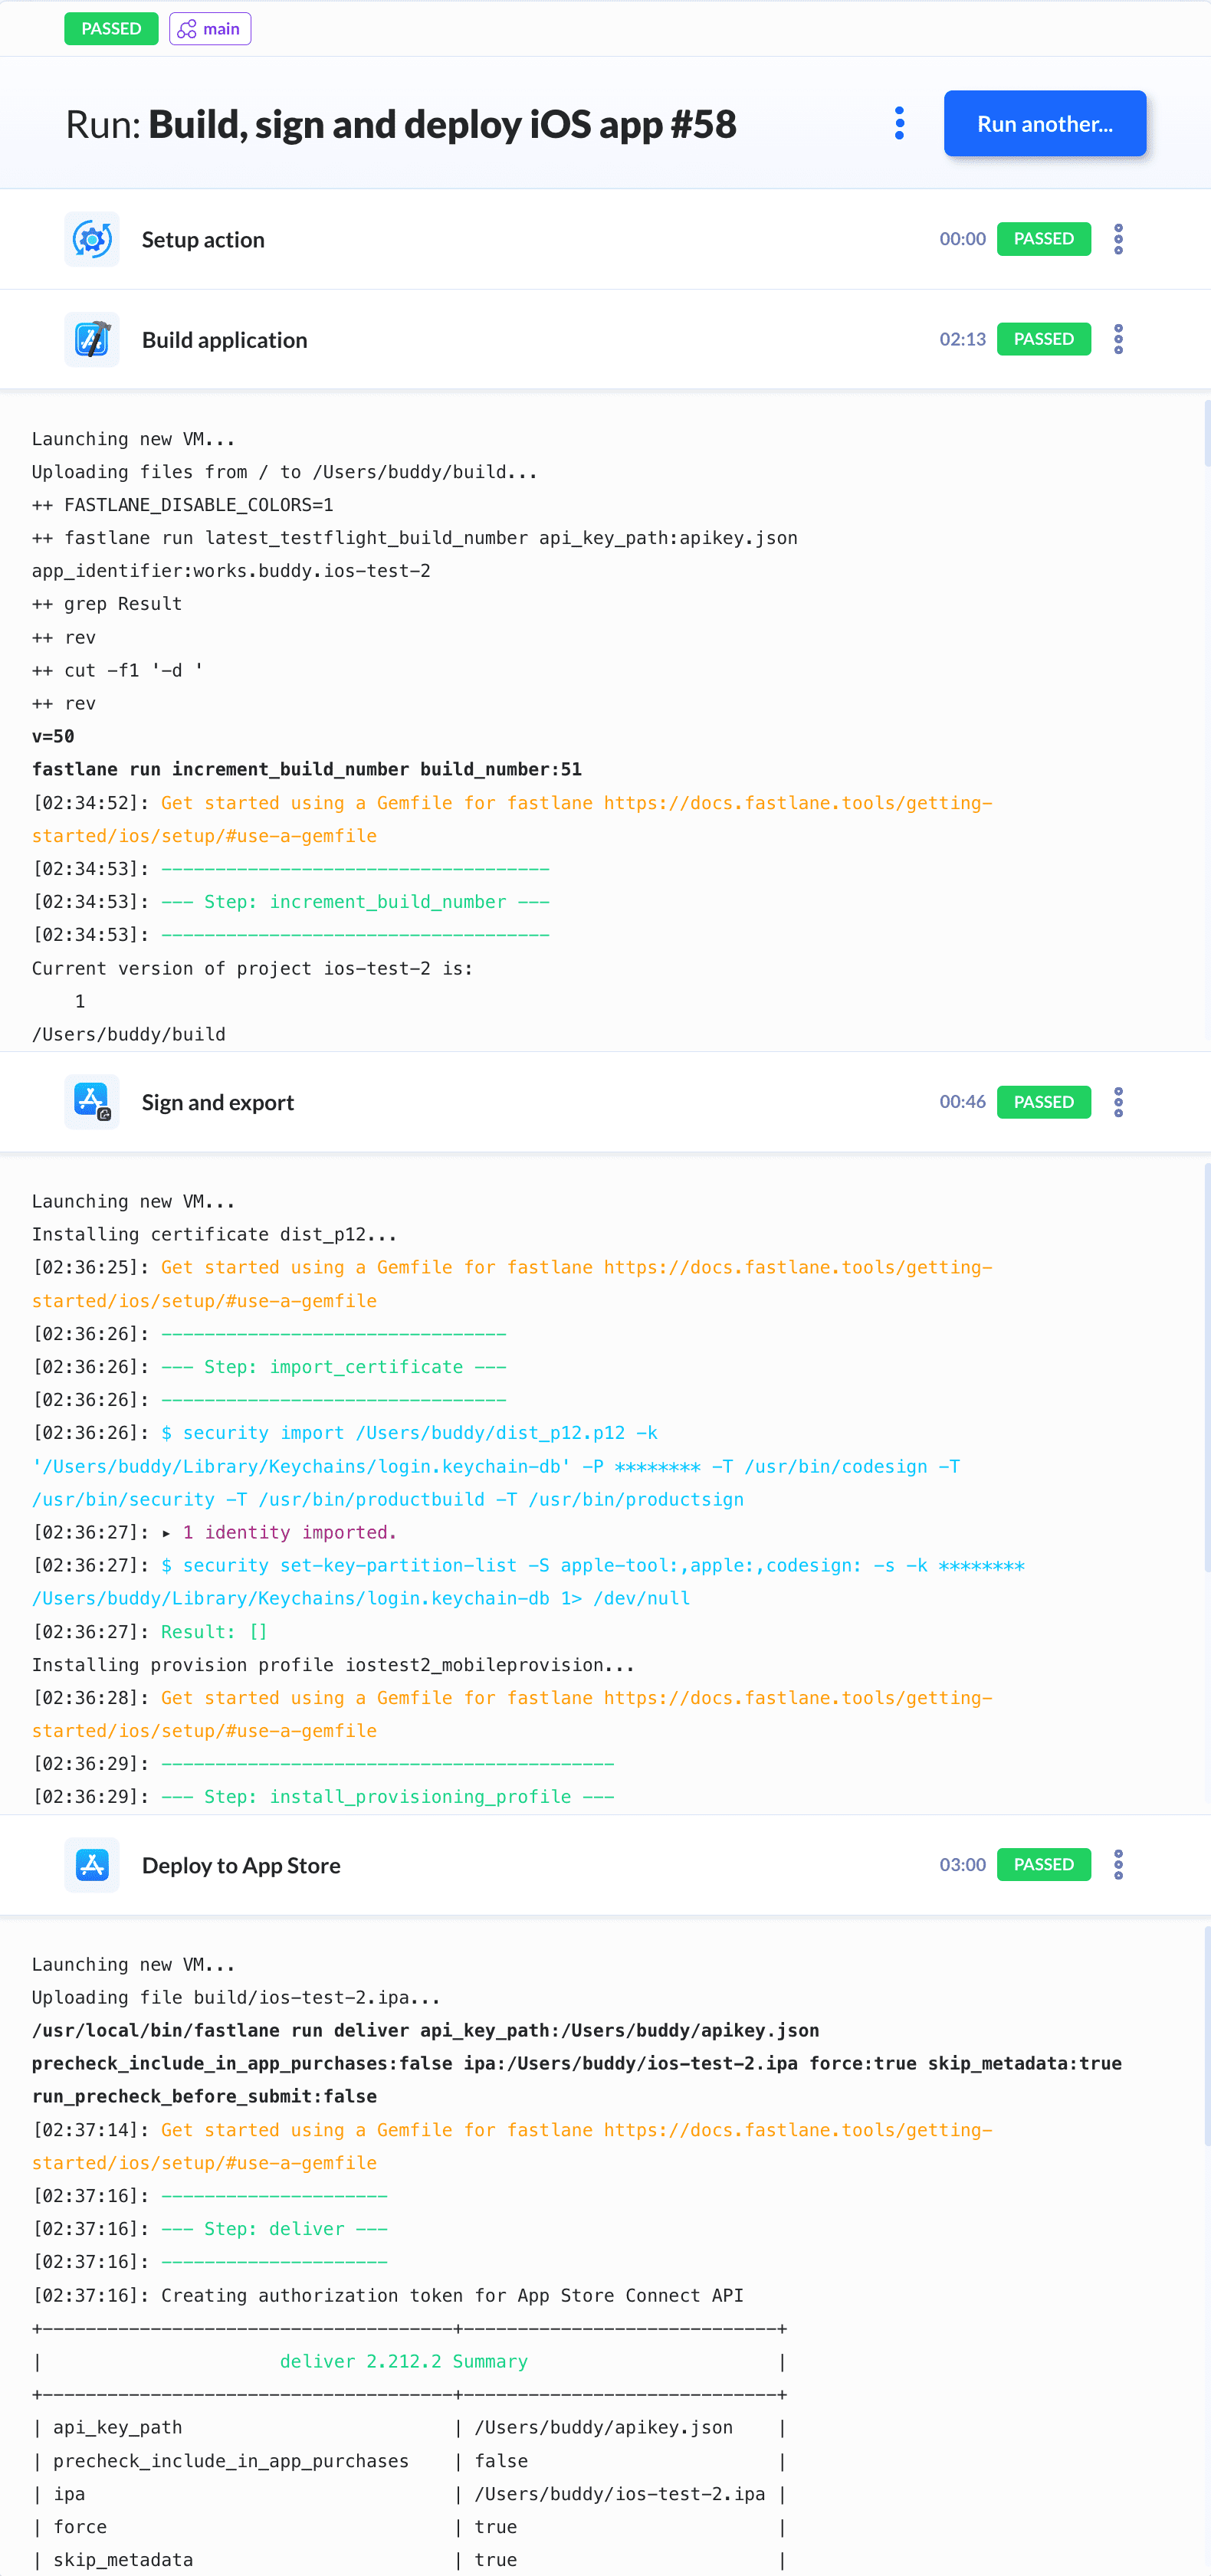 Example pipeline run details with expanded logs